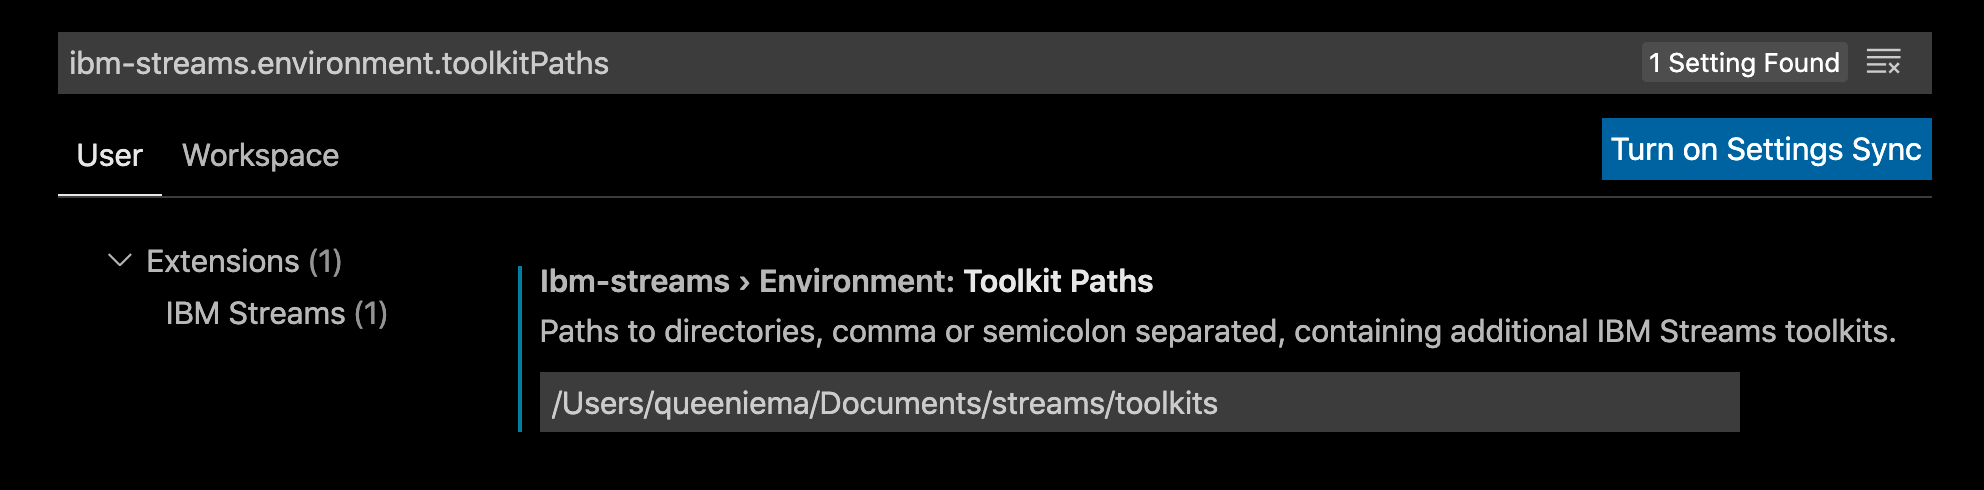 Toolkit Paths setting